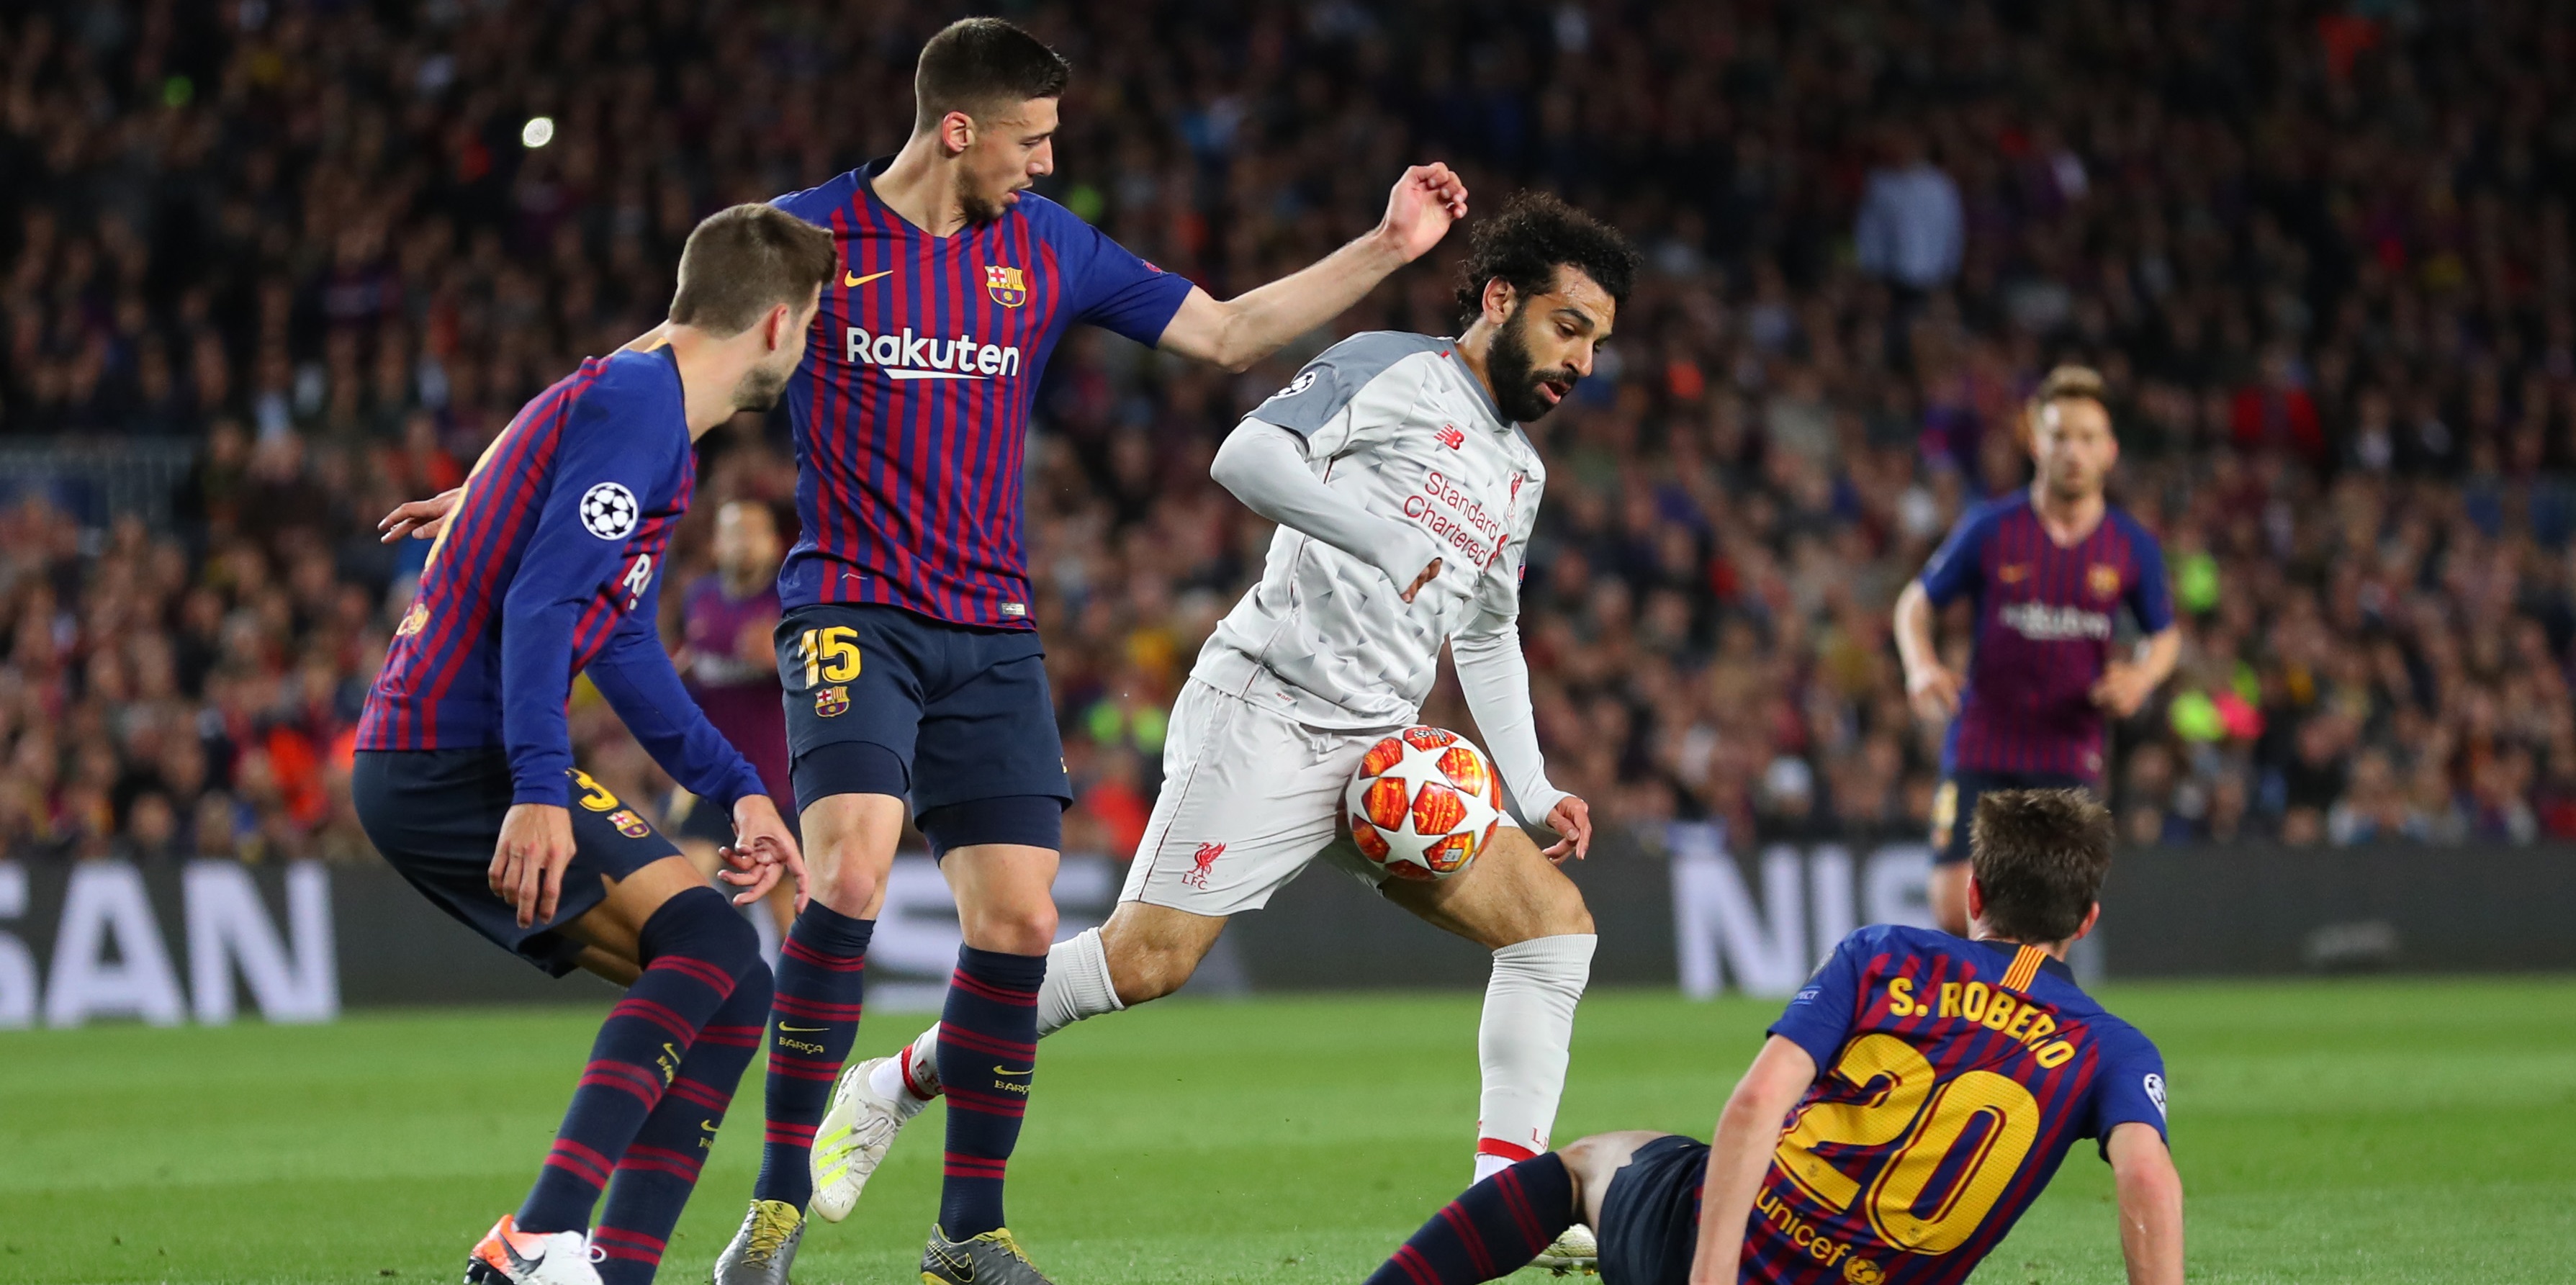 Barcelona chief Laporta hints Salah would fancy La Liga switch in cryptic message: ‘Top players want to join Barca’